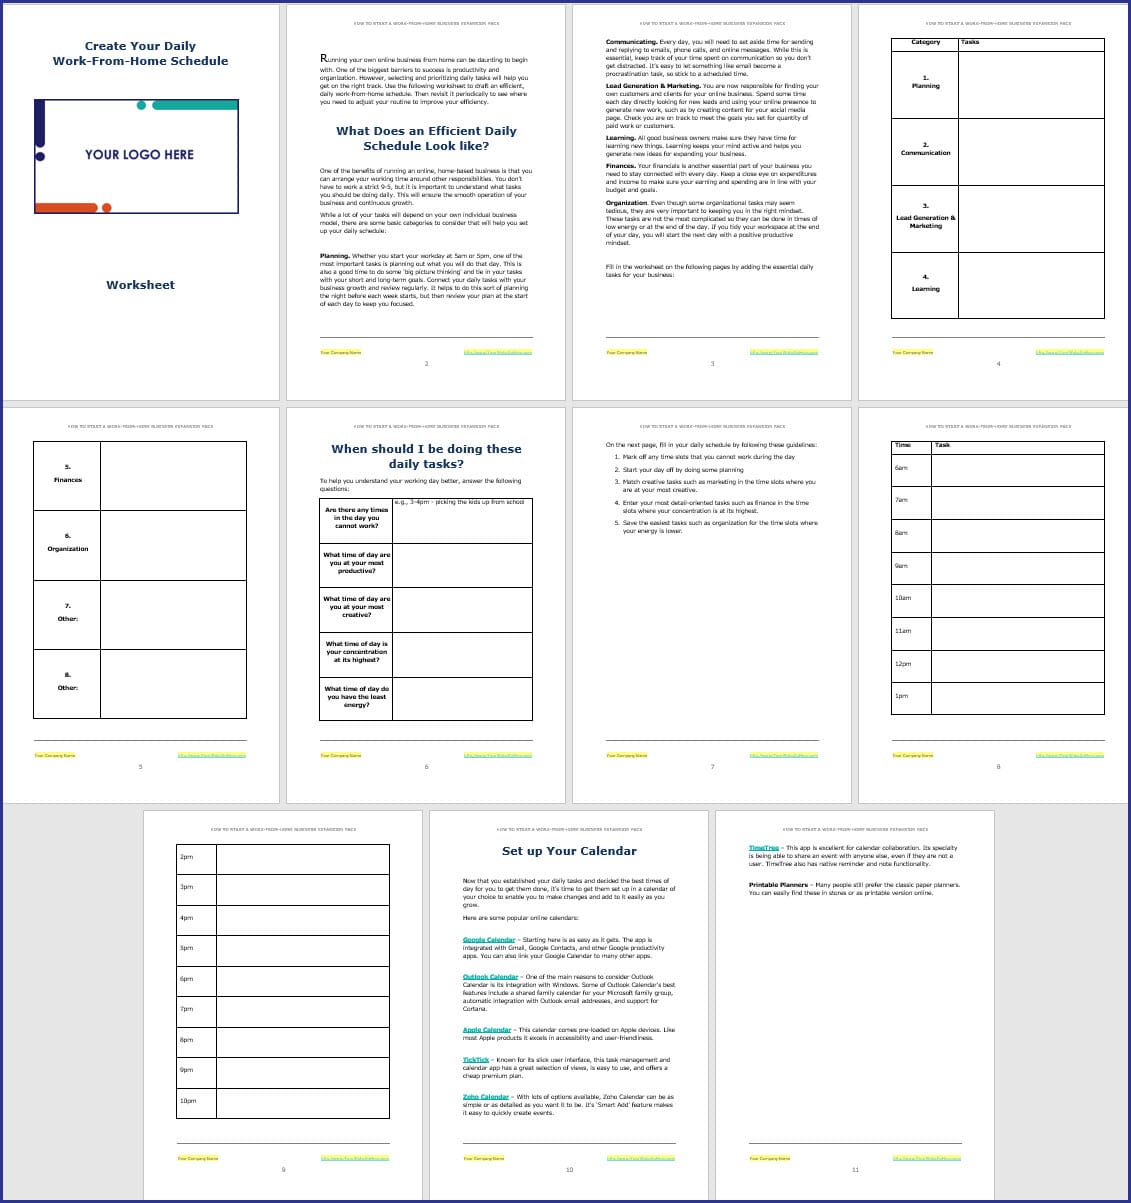 Create Your Daily Work From Home Schedule Worksheet